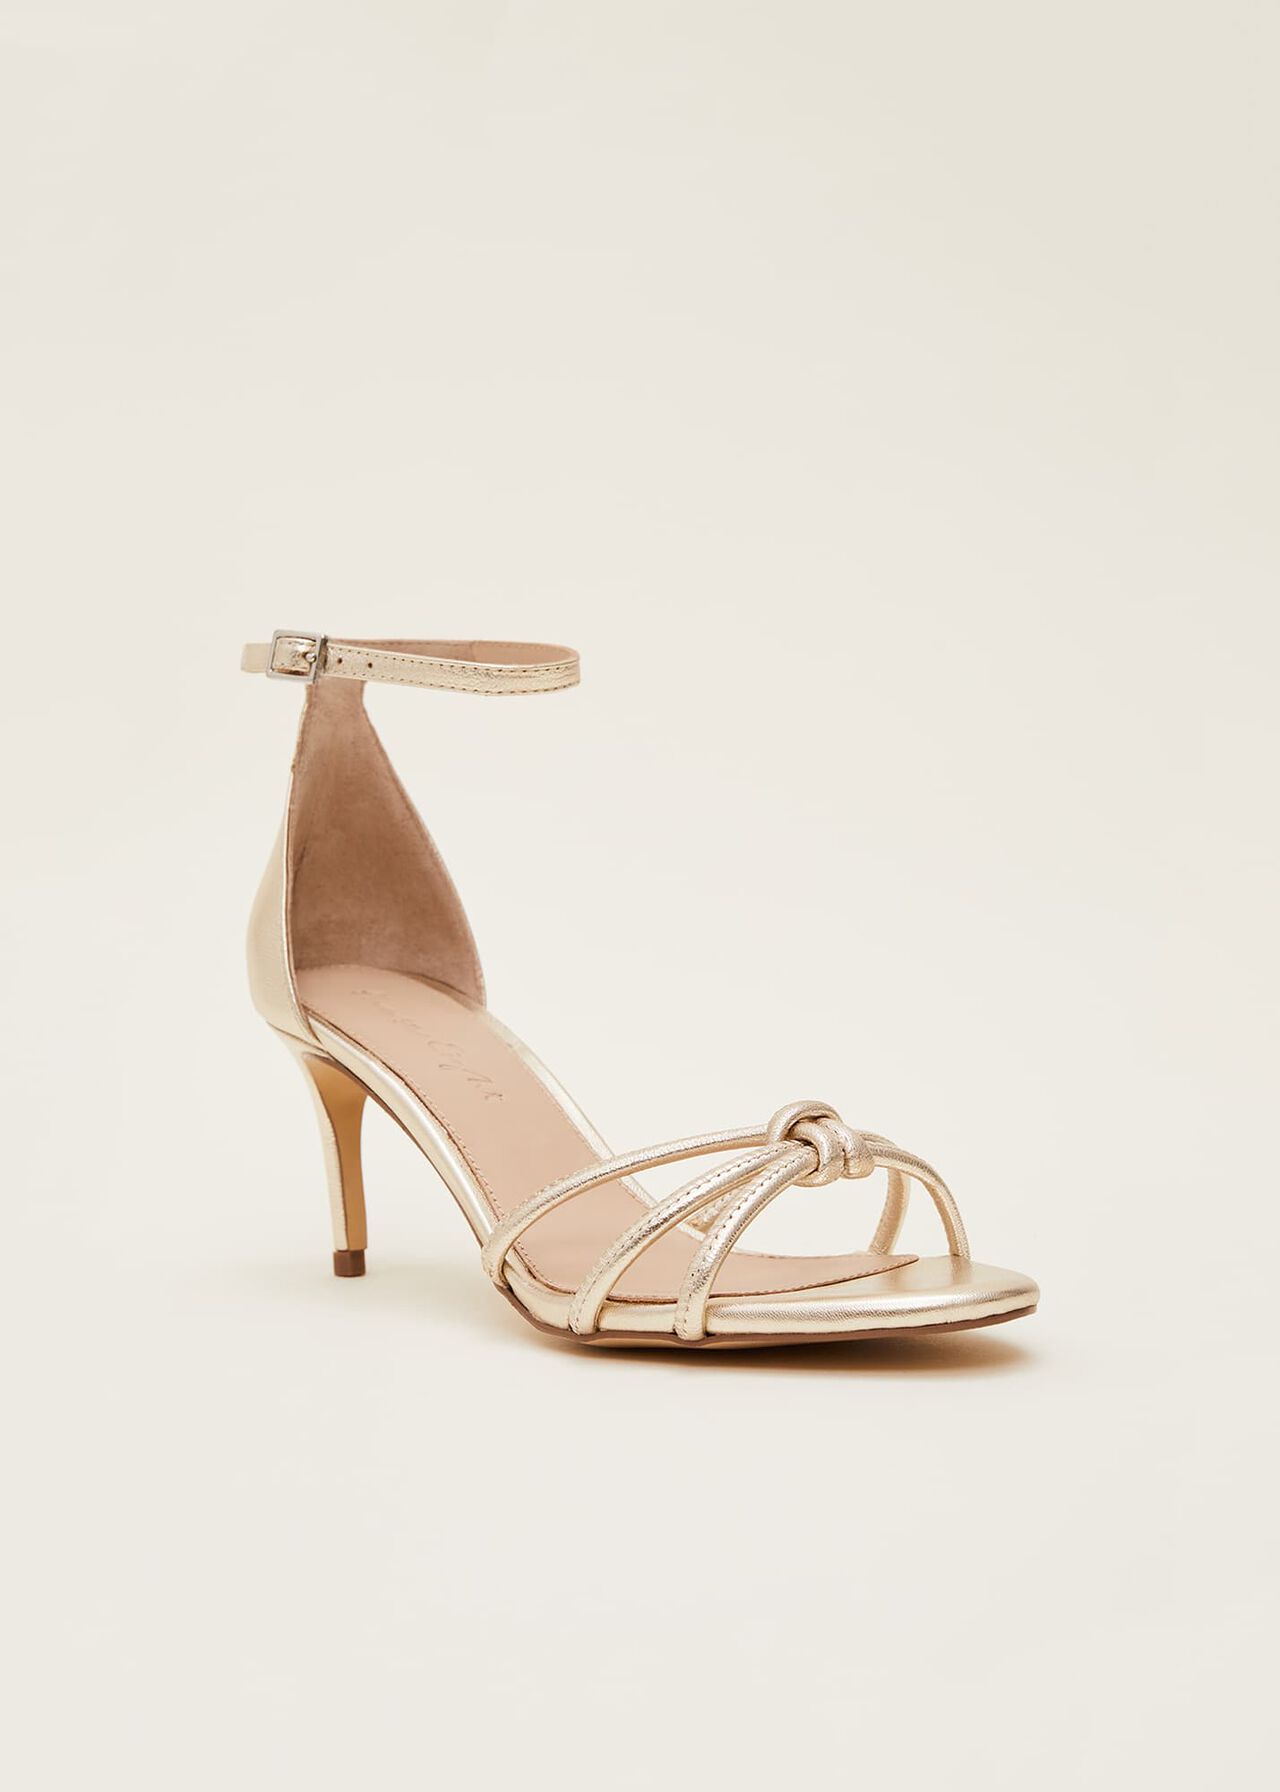 Barely There Knotted Sandal